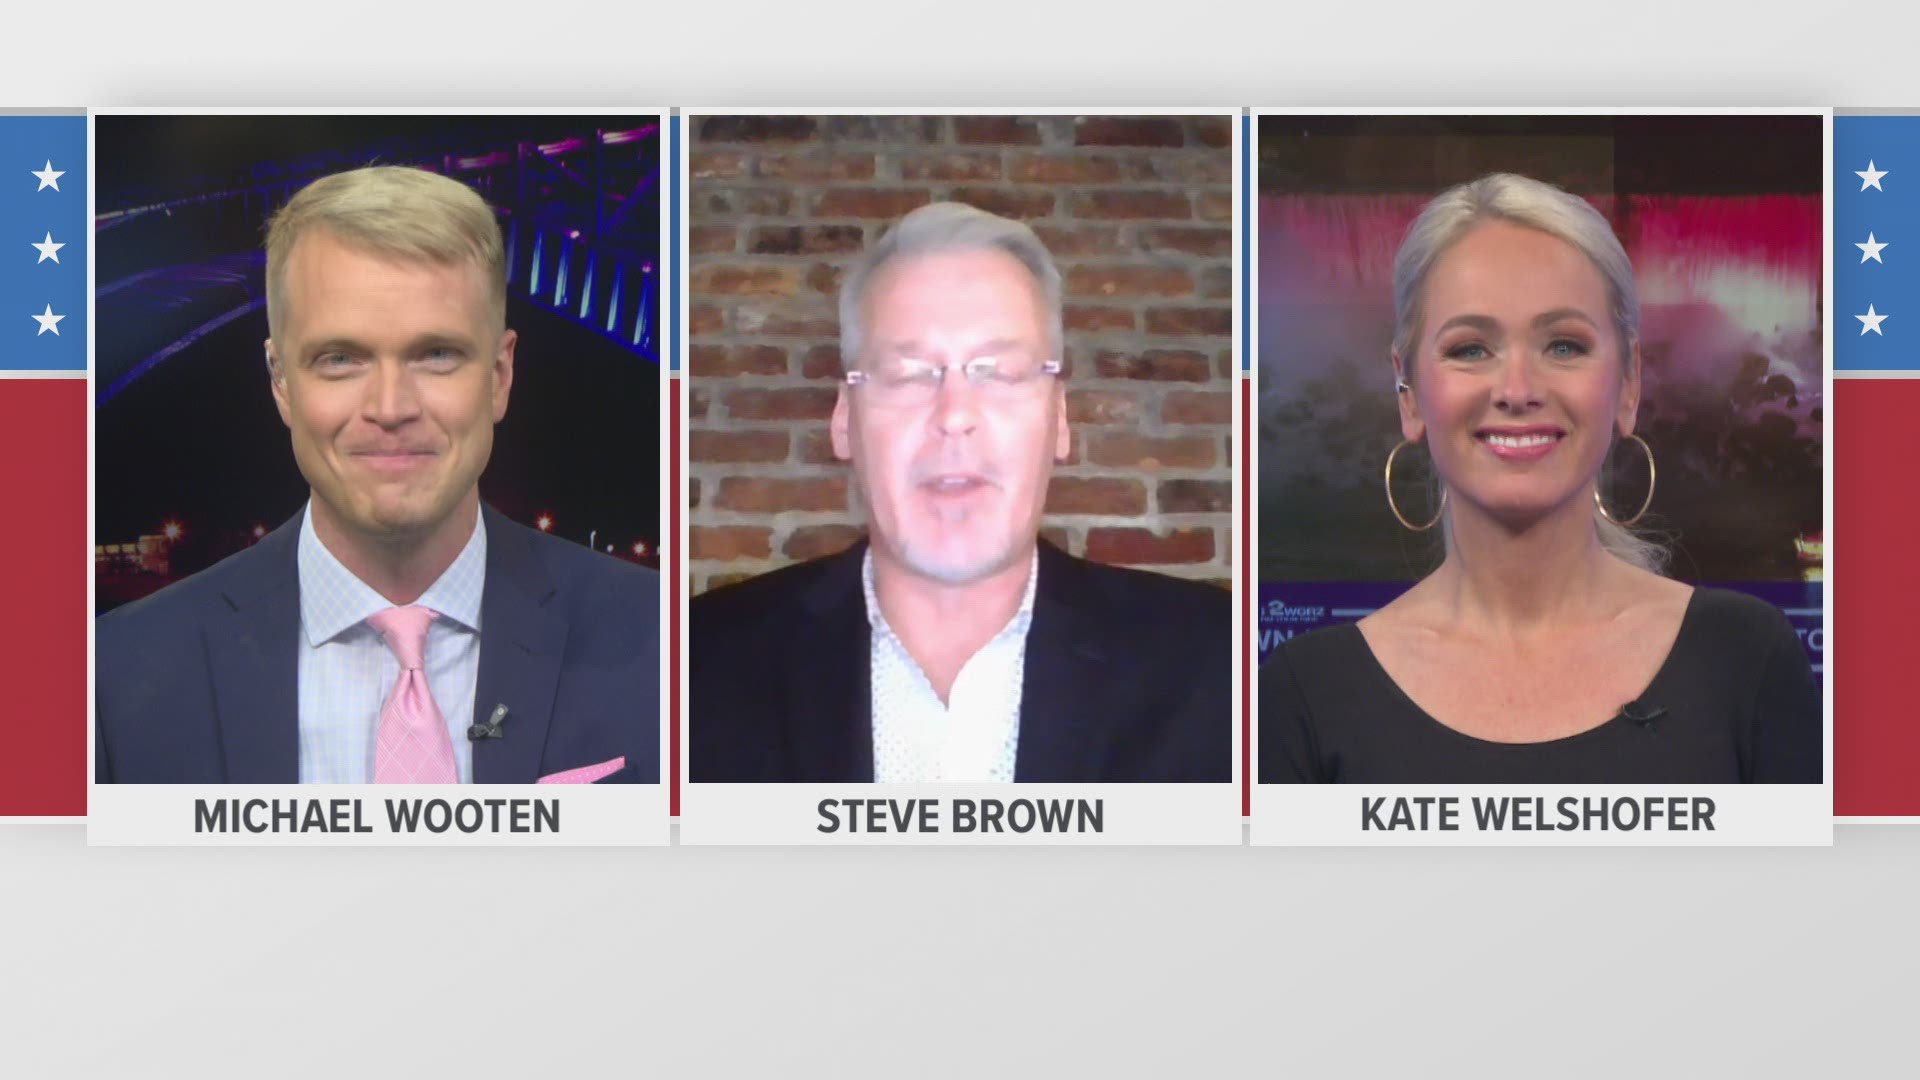 Steve Brown Joins our town hall to discuss the record breaking election